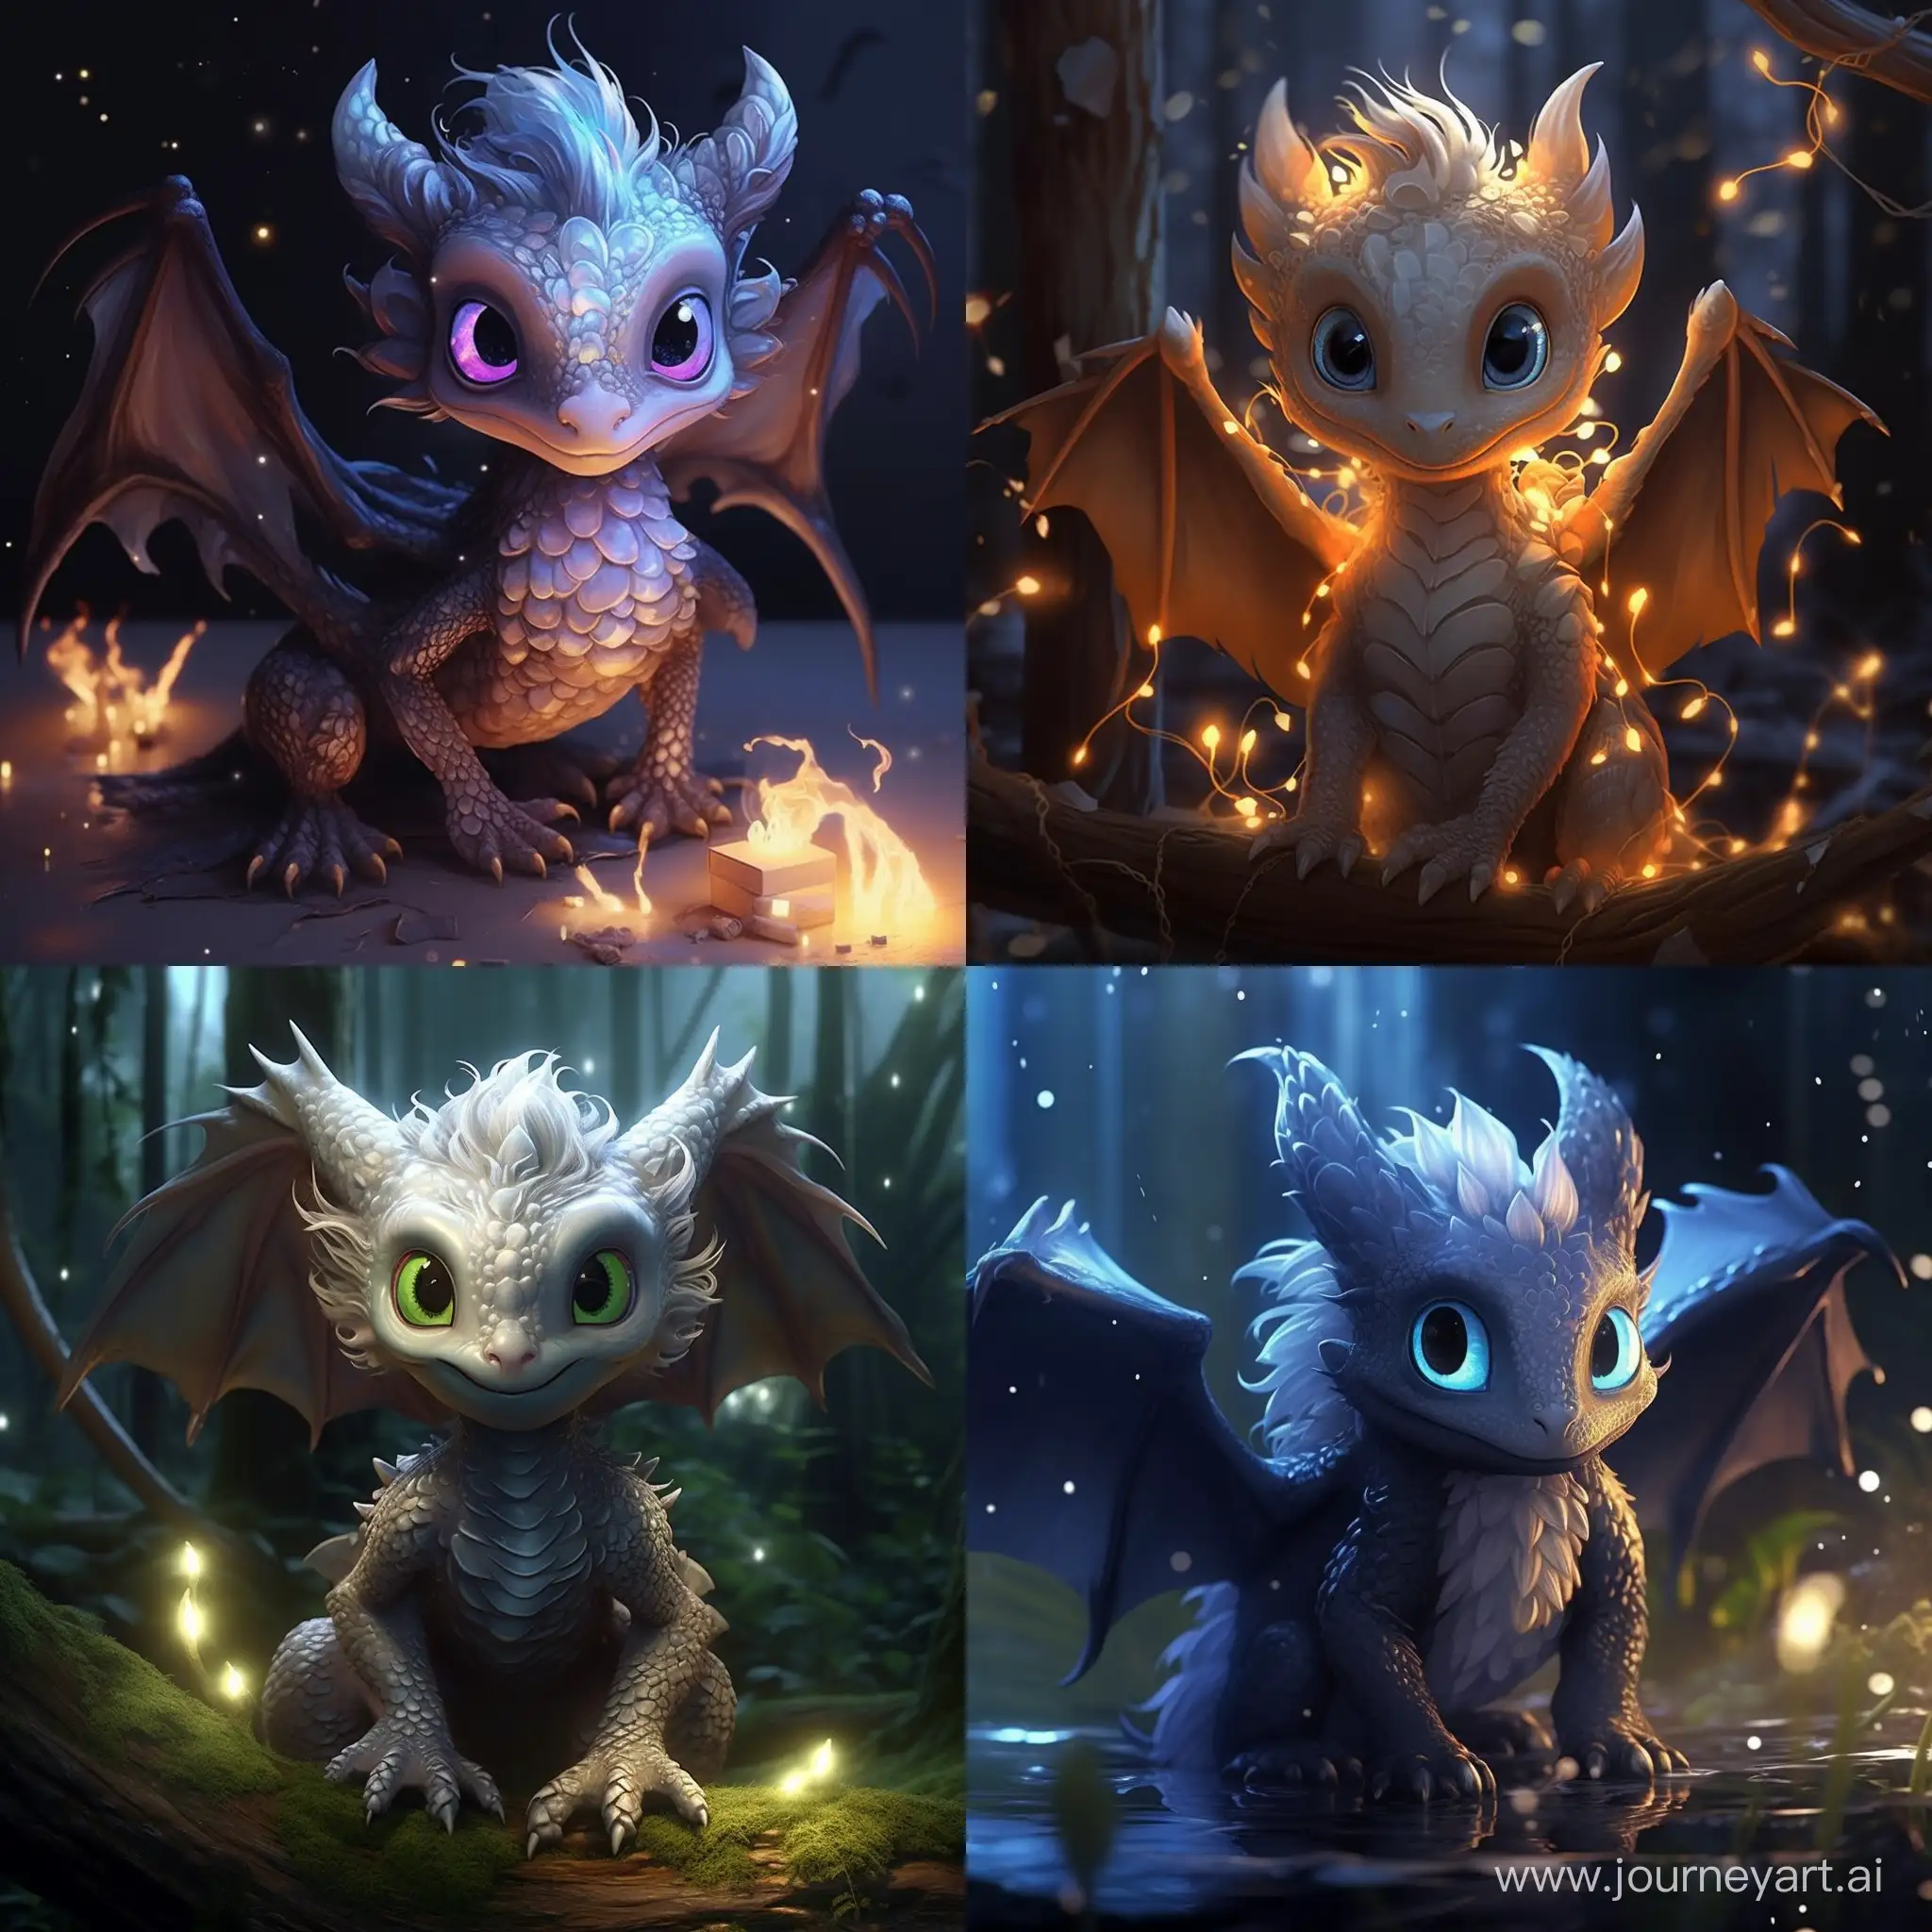 A (((cute young dragon))), with (((shimmering reflective scales))), and ((big, luminescent eyes)), intricate details that make it highly realistic